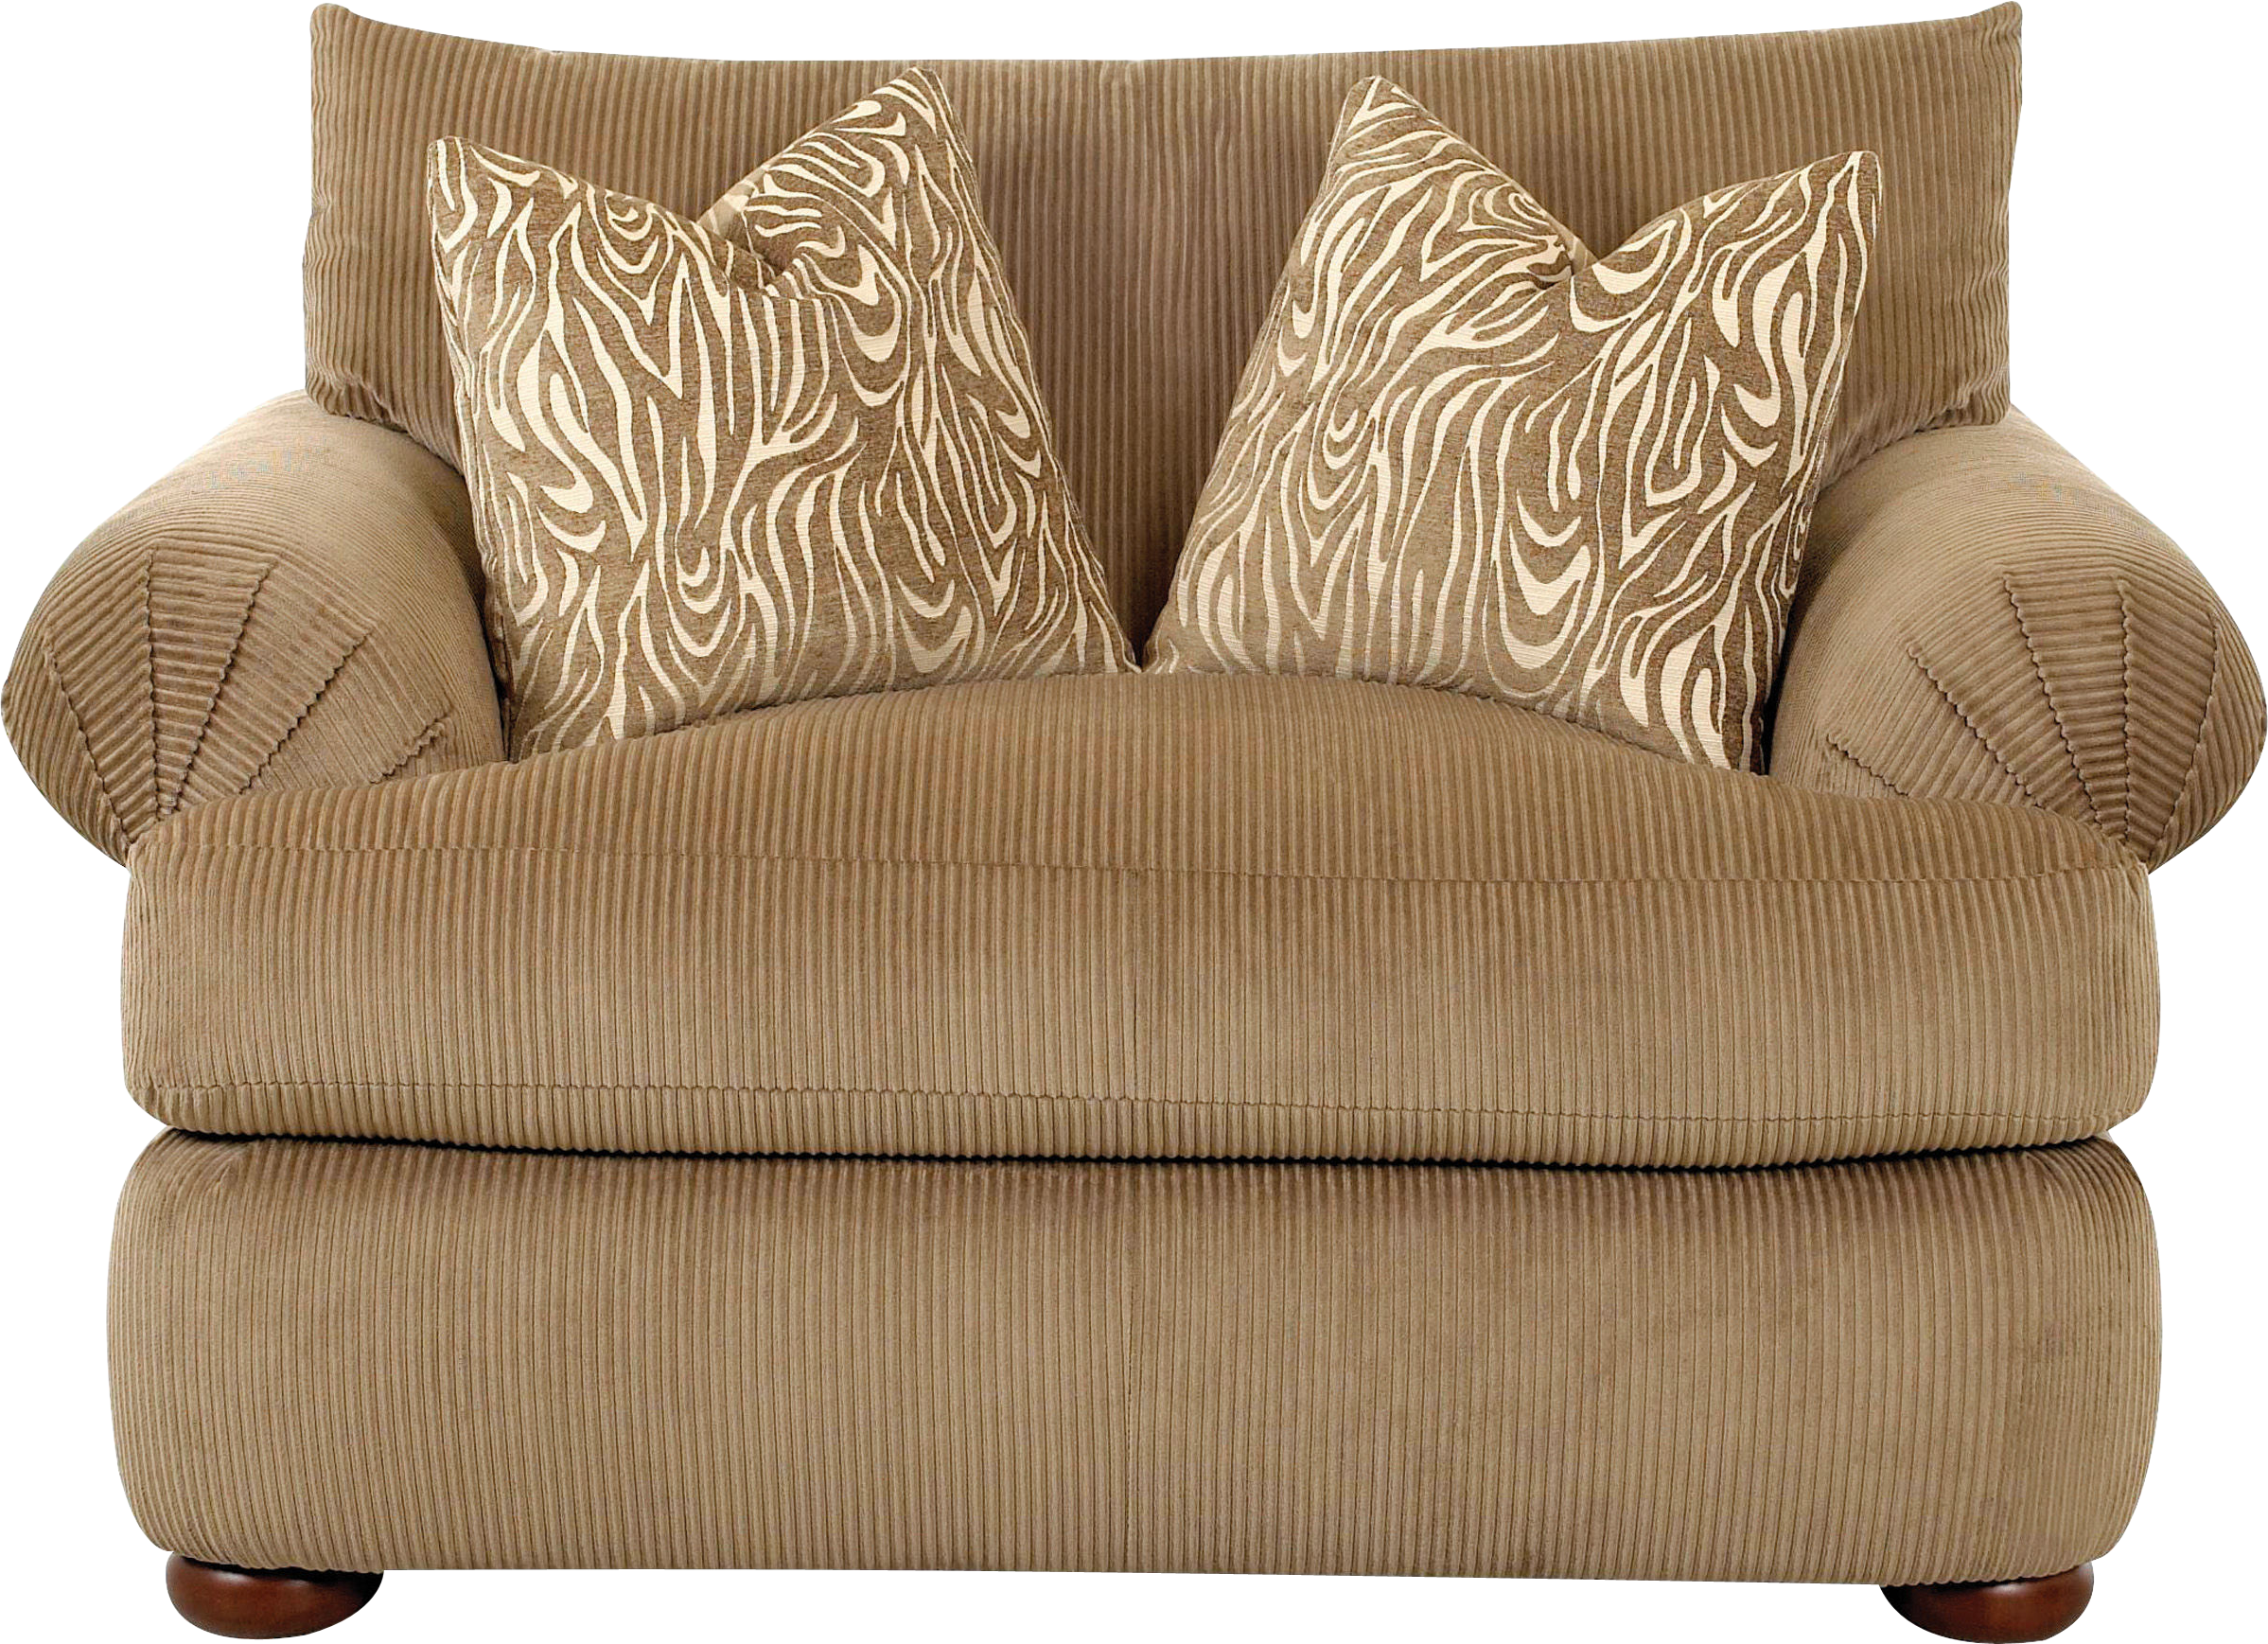 Sofa Chaise Longue PNG Transparant Beeld